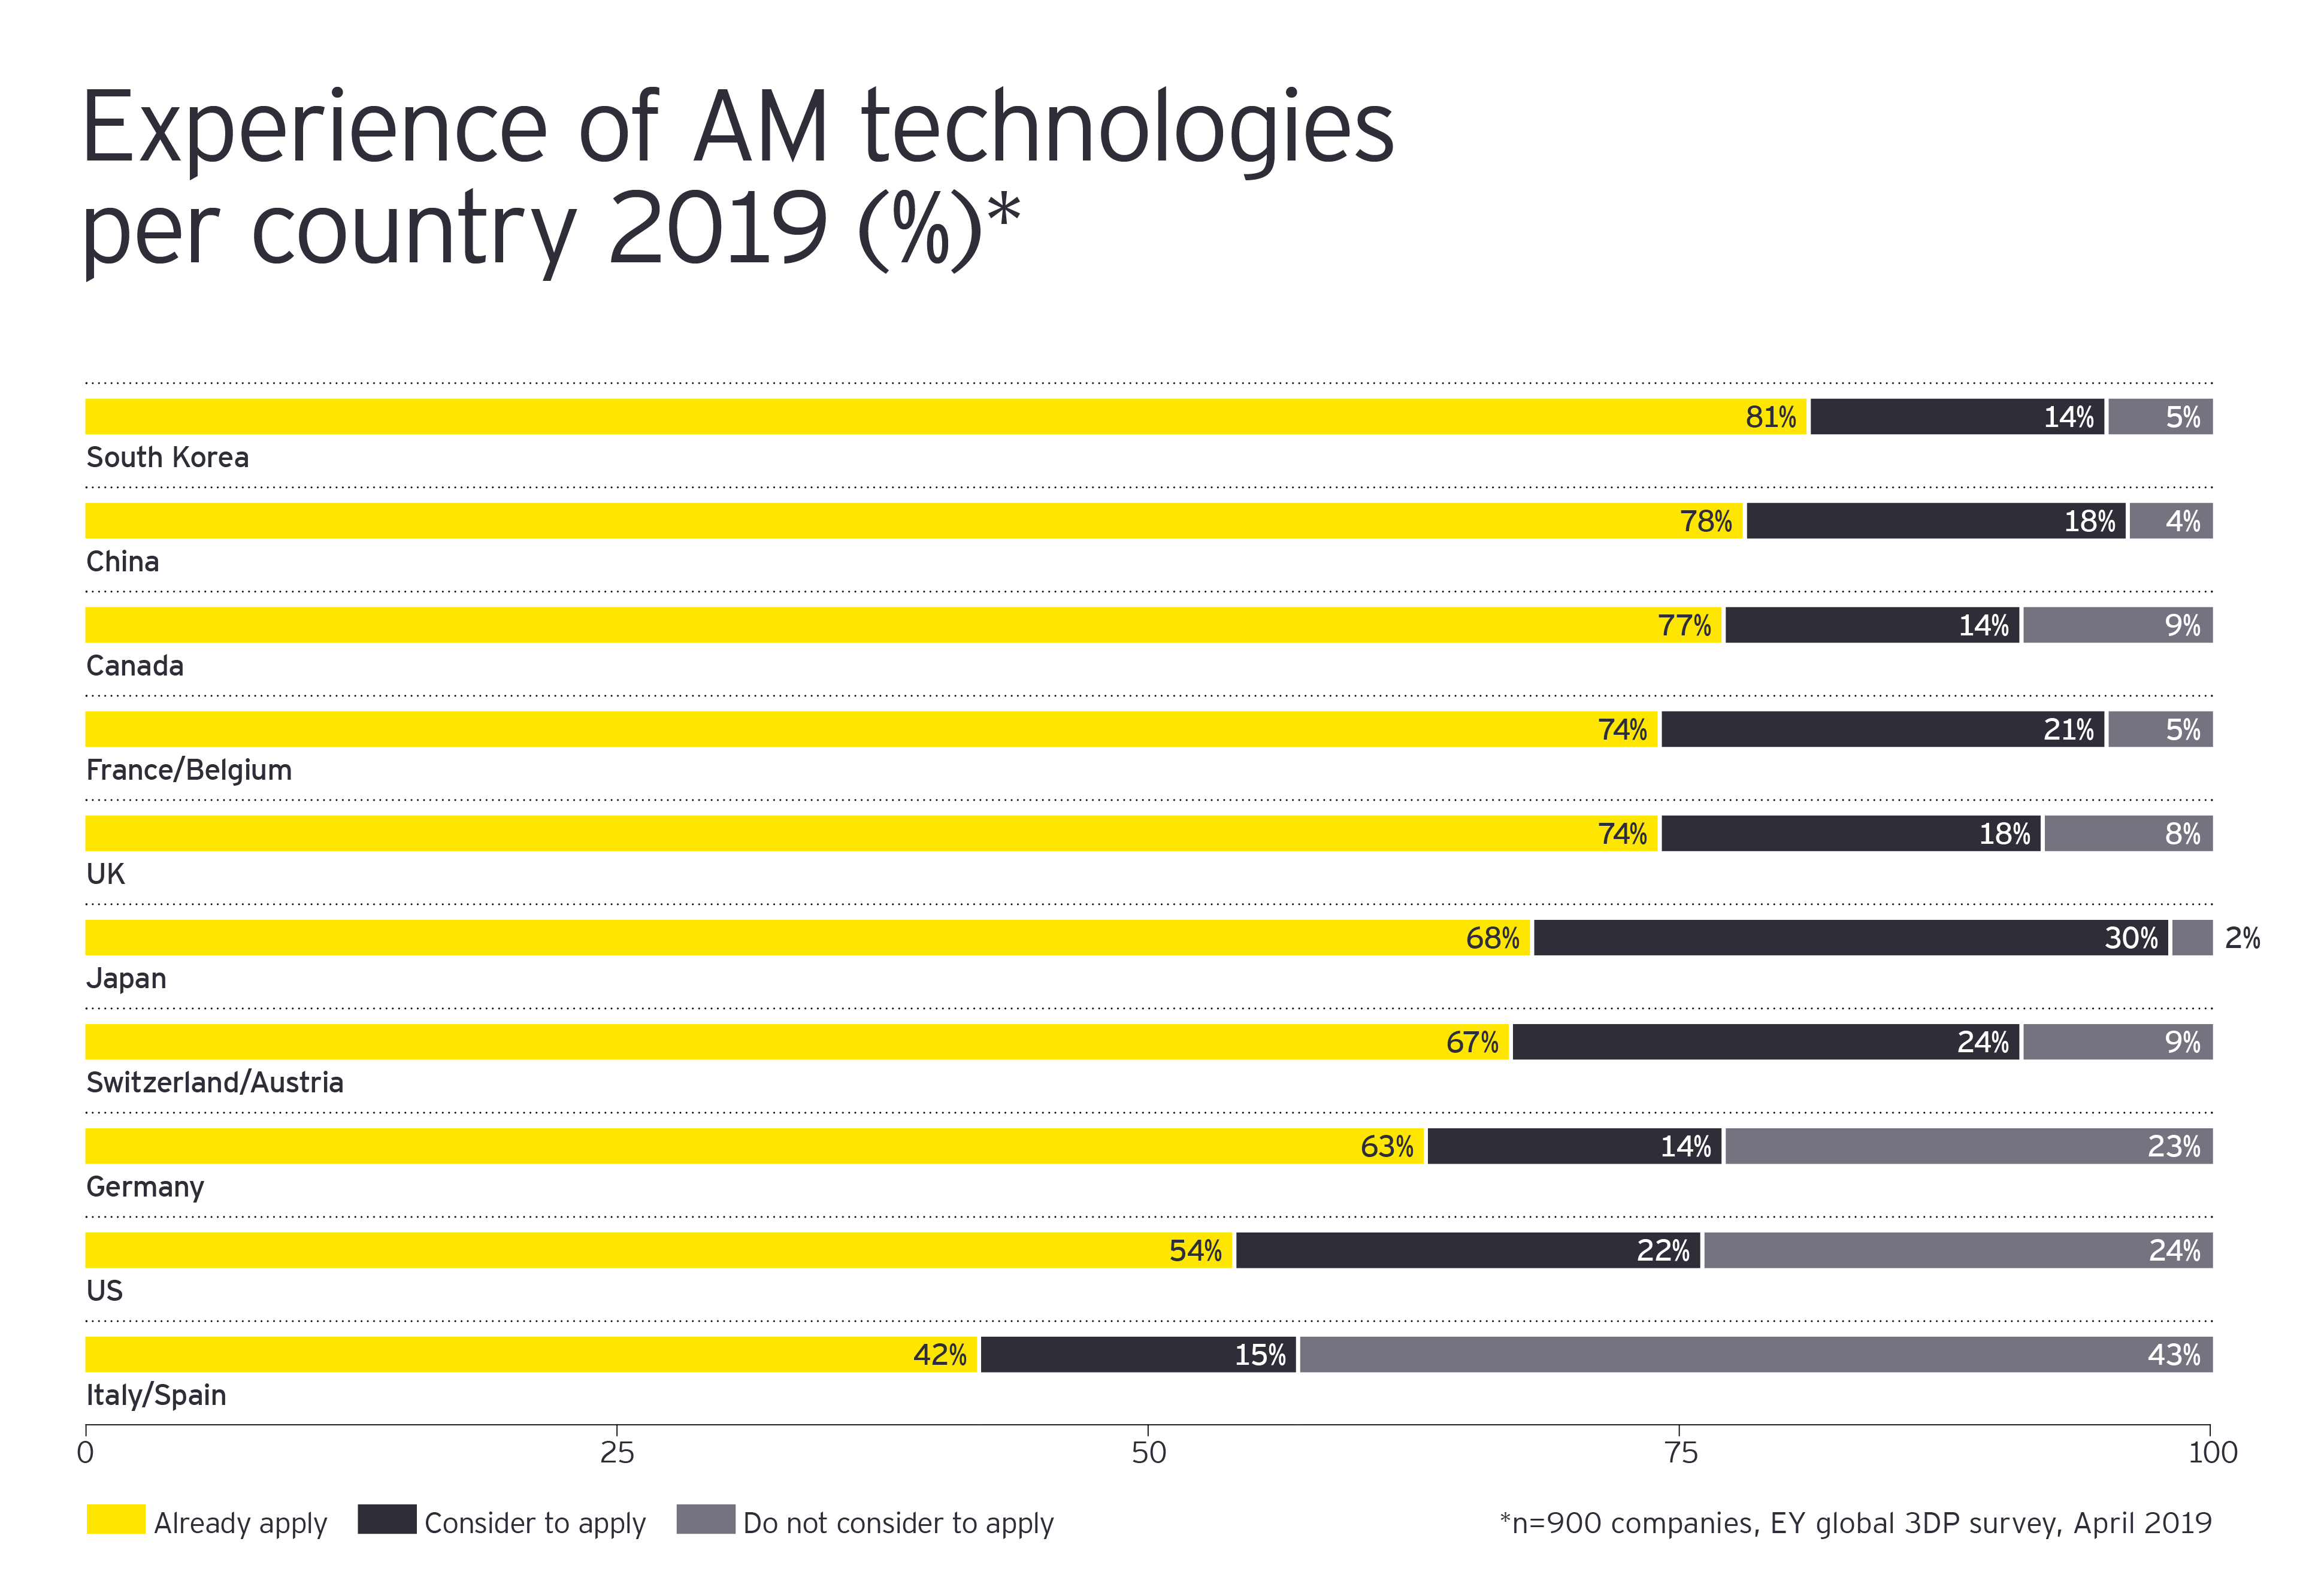 Experience of AM technologies per country 2019 infograph